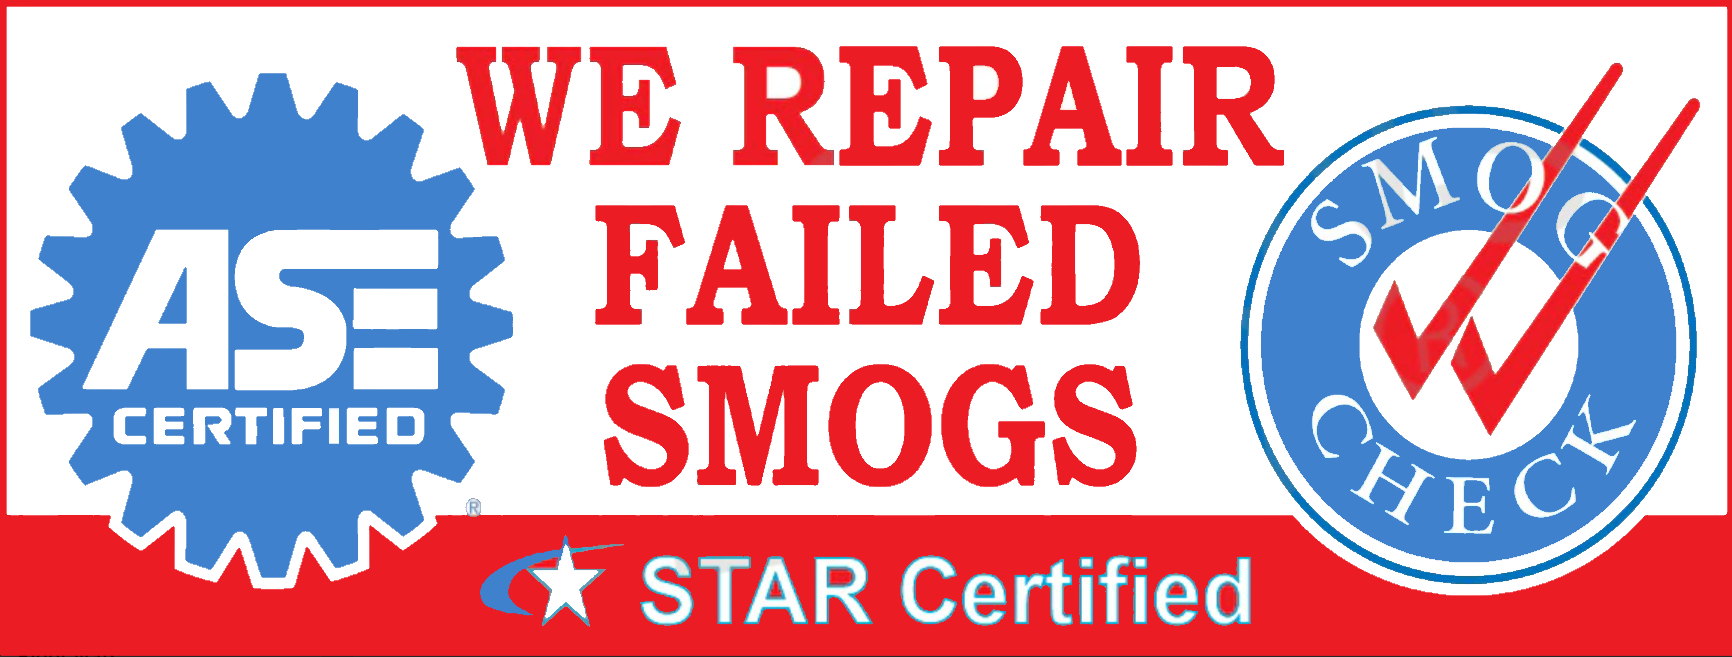 We Repair Failed Smogs | ASE and Smog Check | Vinyl Banner